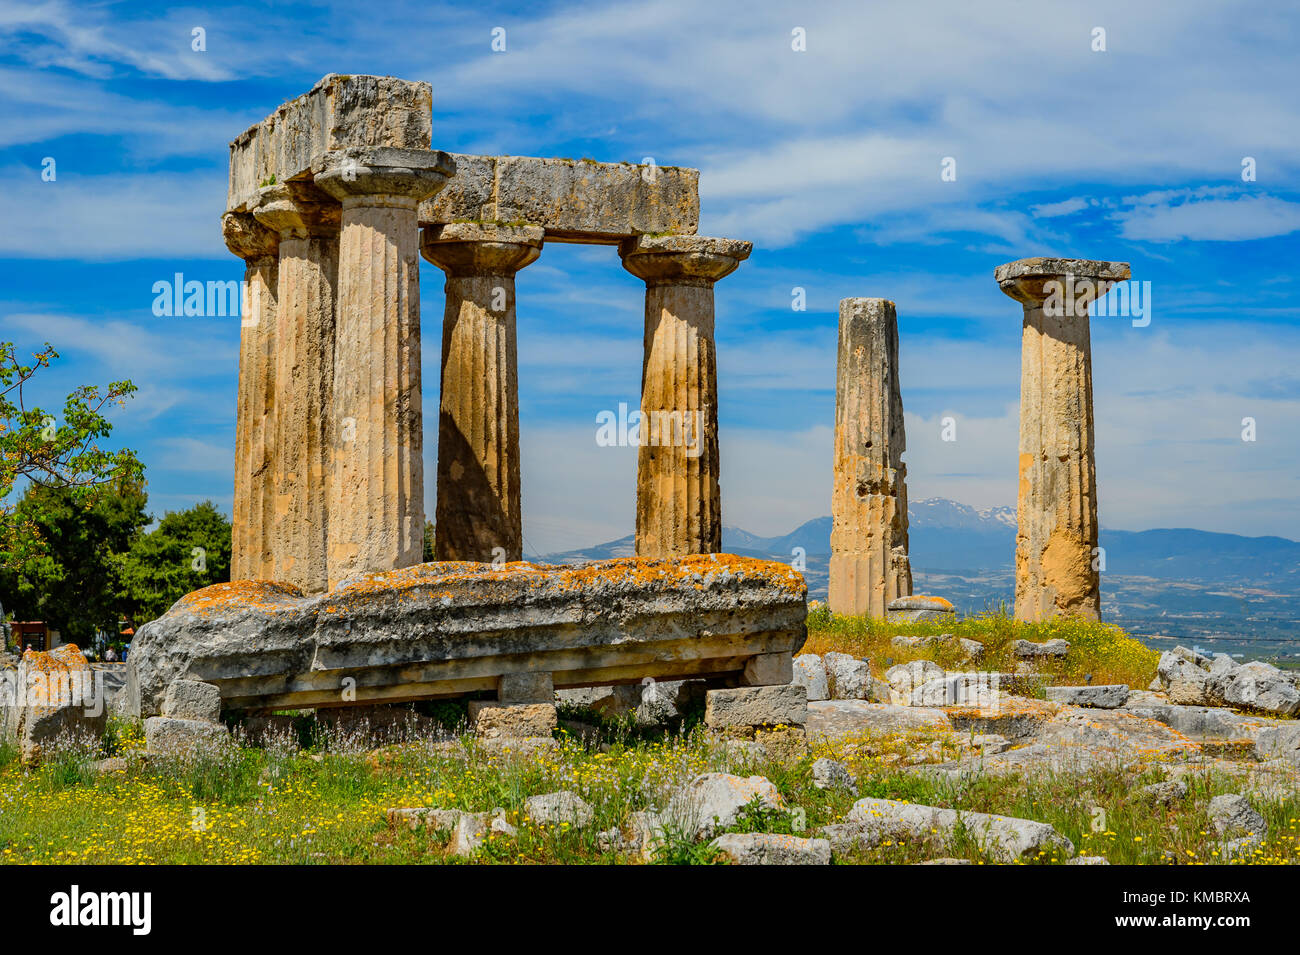 The ruins of the Apollo Temple in ancient Corinth, Greece Stock Photo